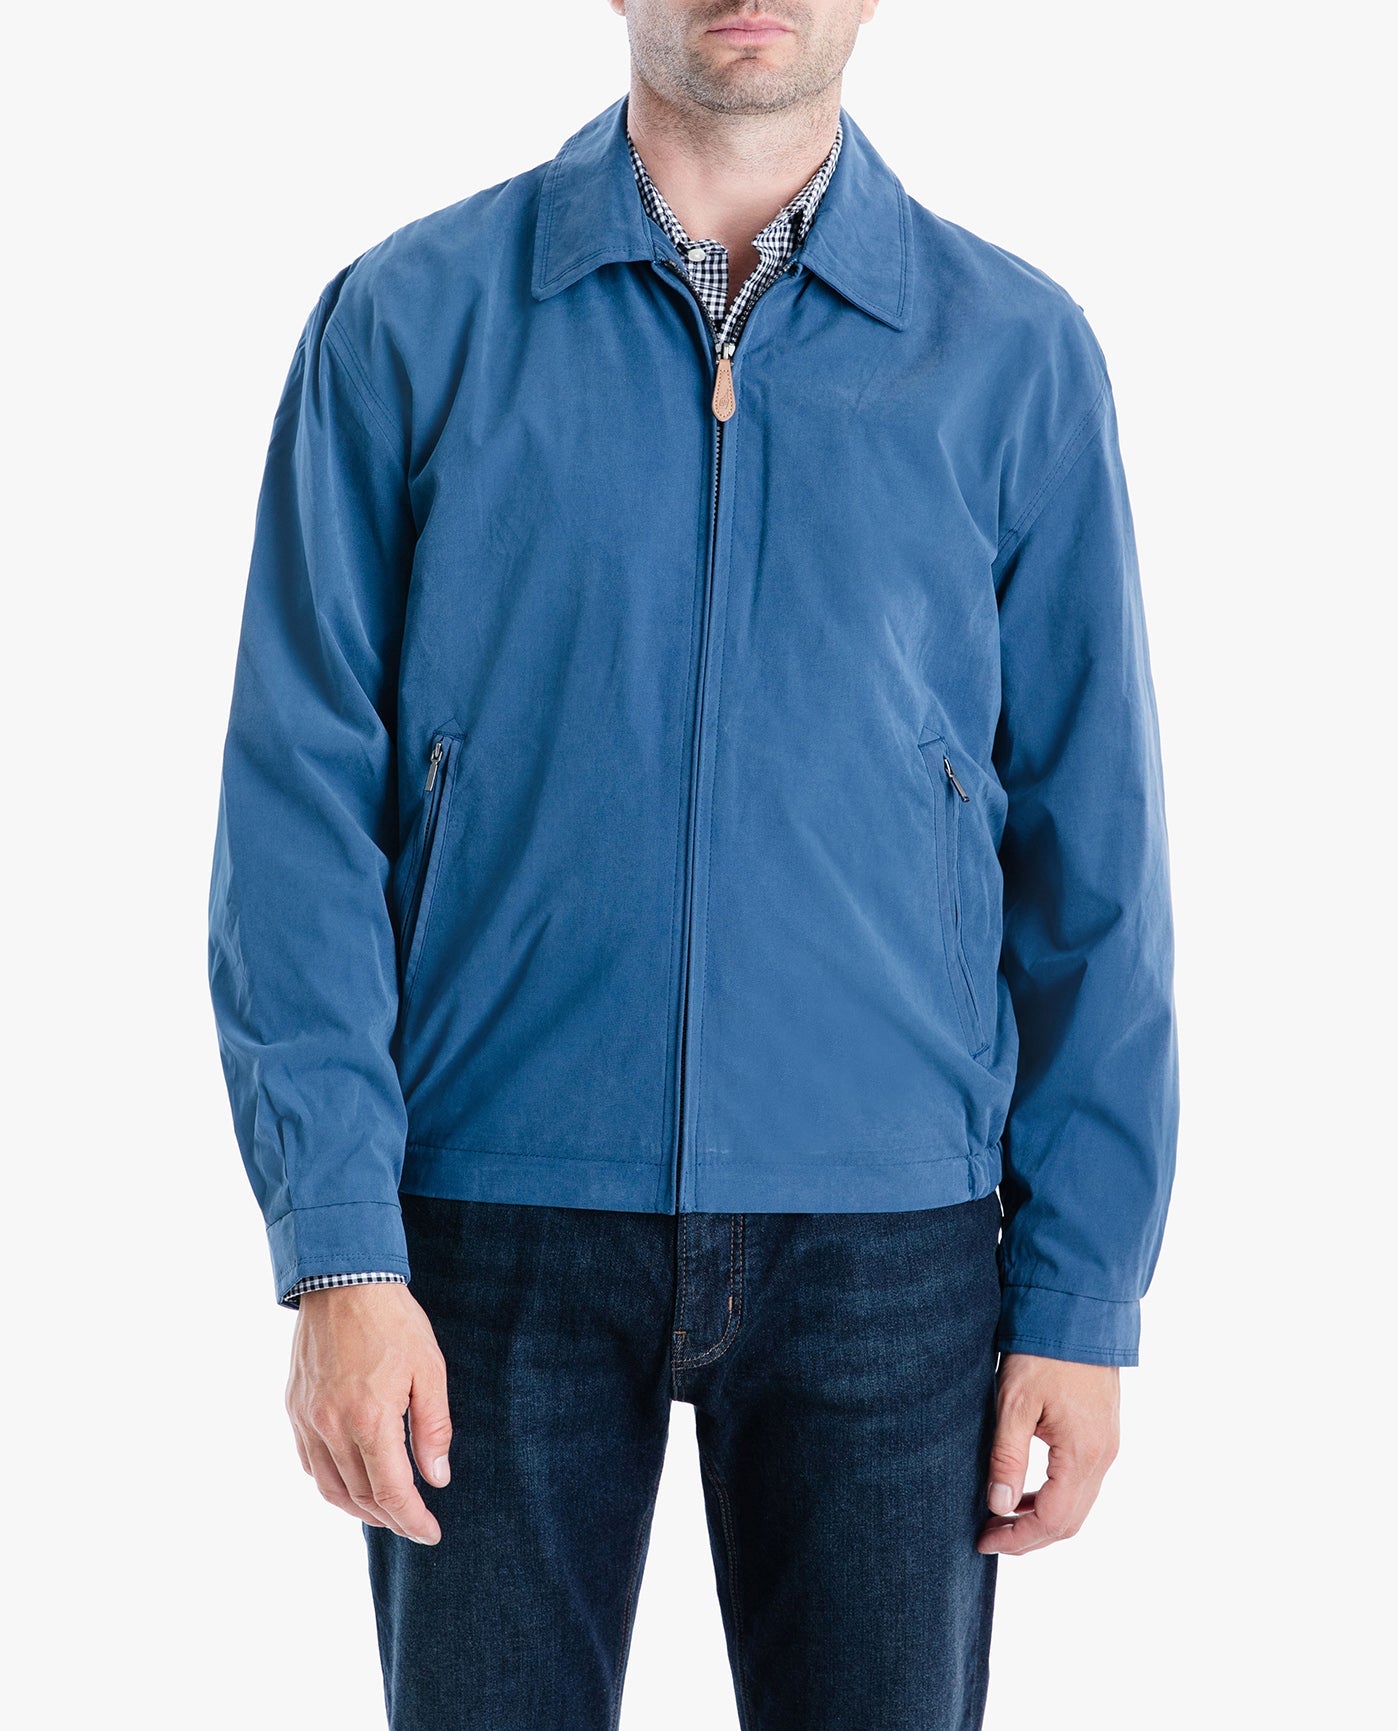 DETAIL VIEW OF LIGHT WEIGHT ZIP FRONT GOLF JACKET | PACIFIC BLUE